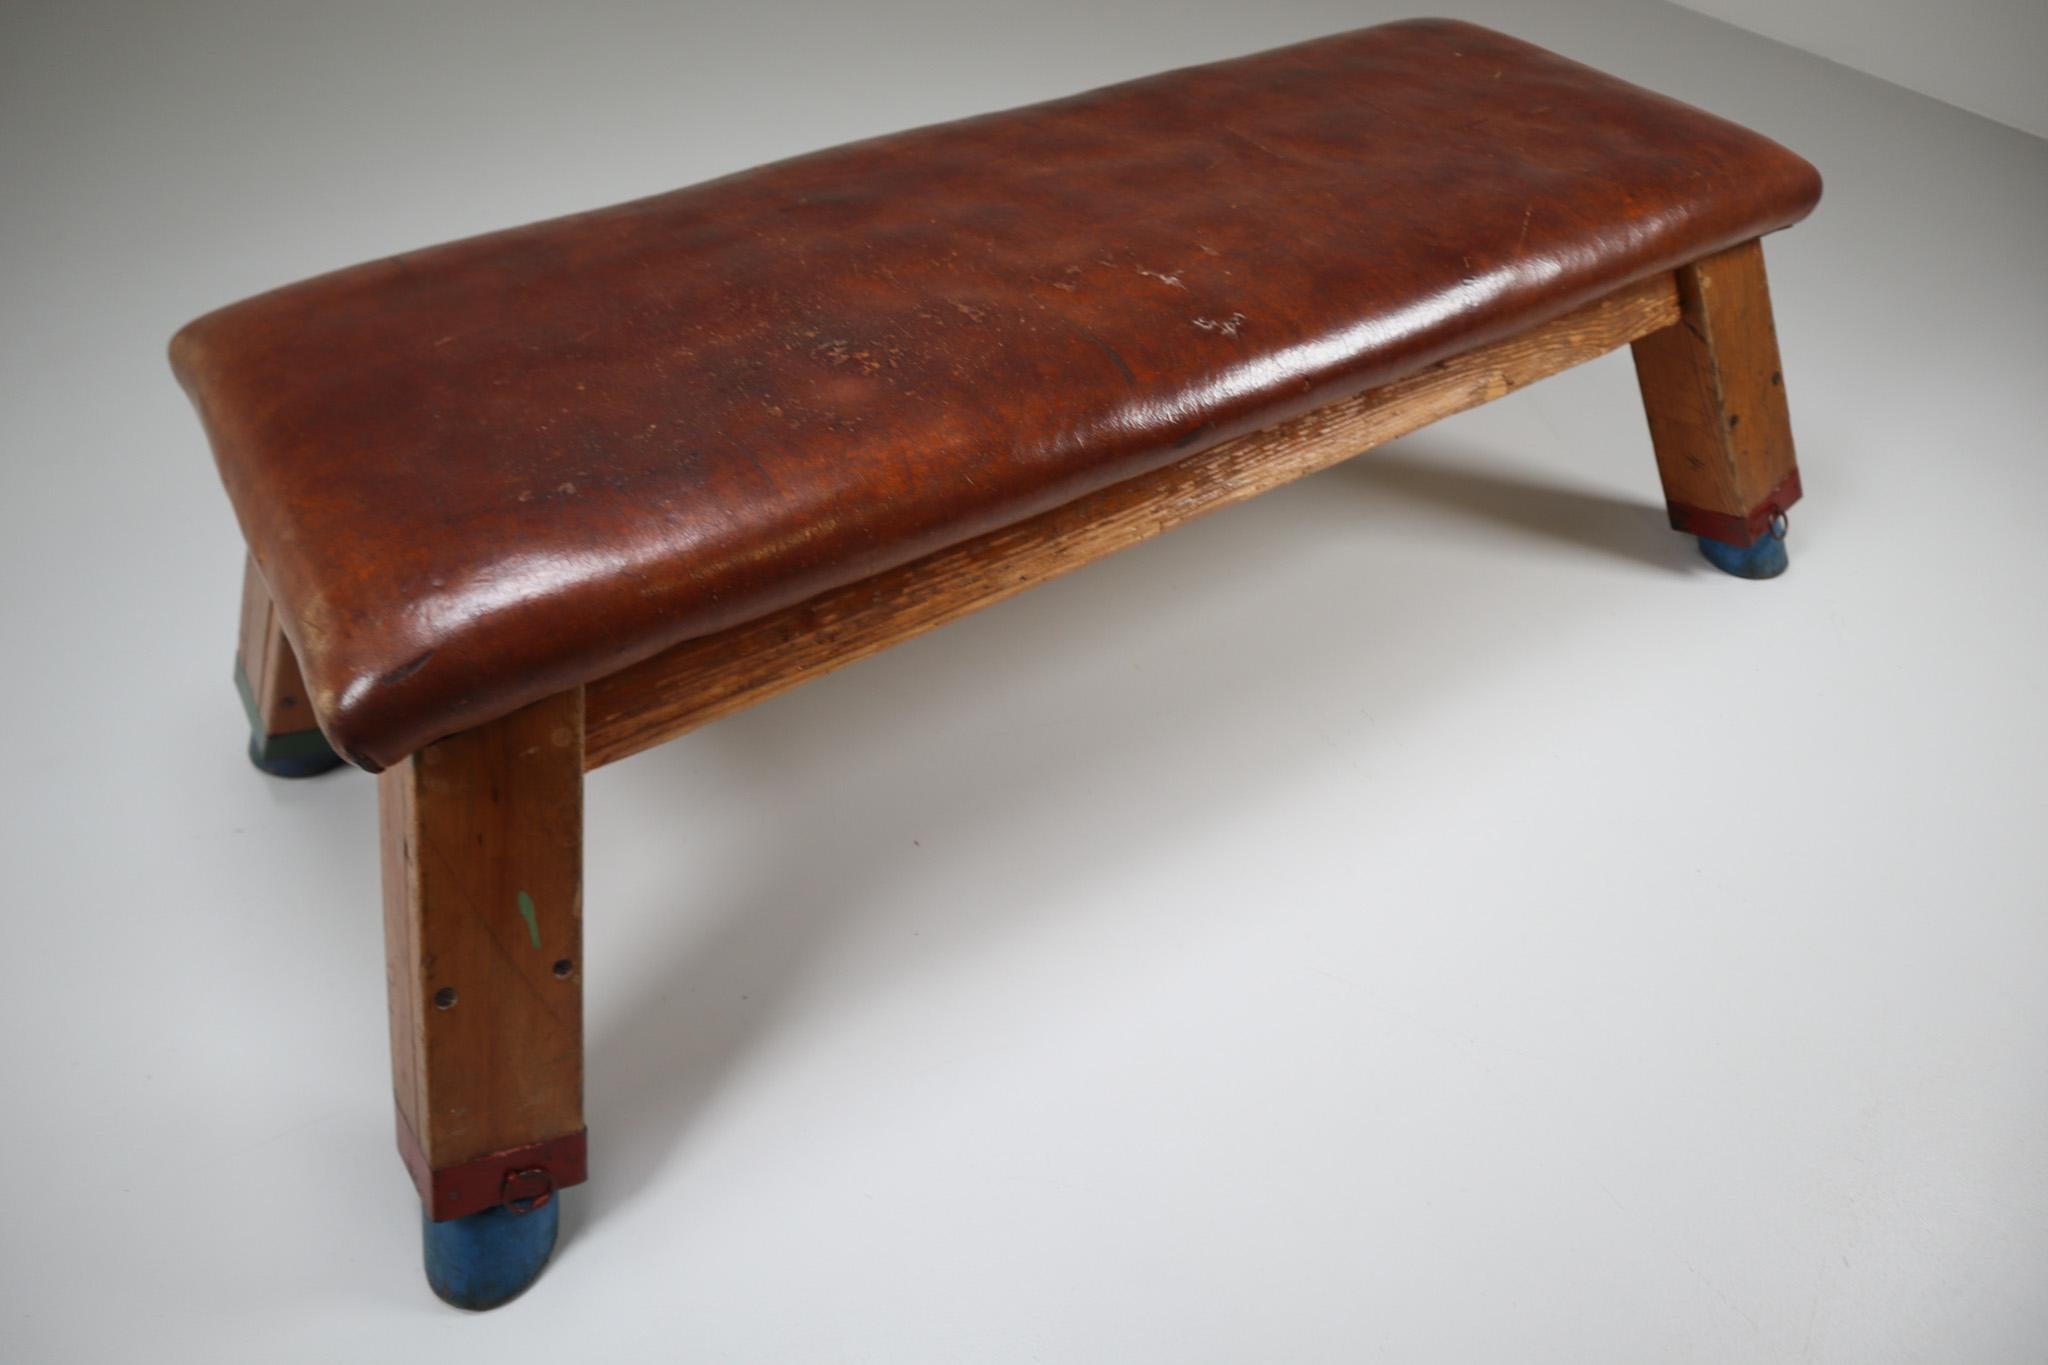 Dutch European Vintage Patinated Leather Gym Bench or Table, circa 1950s